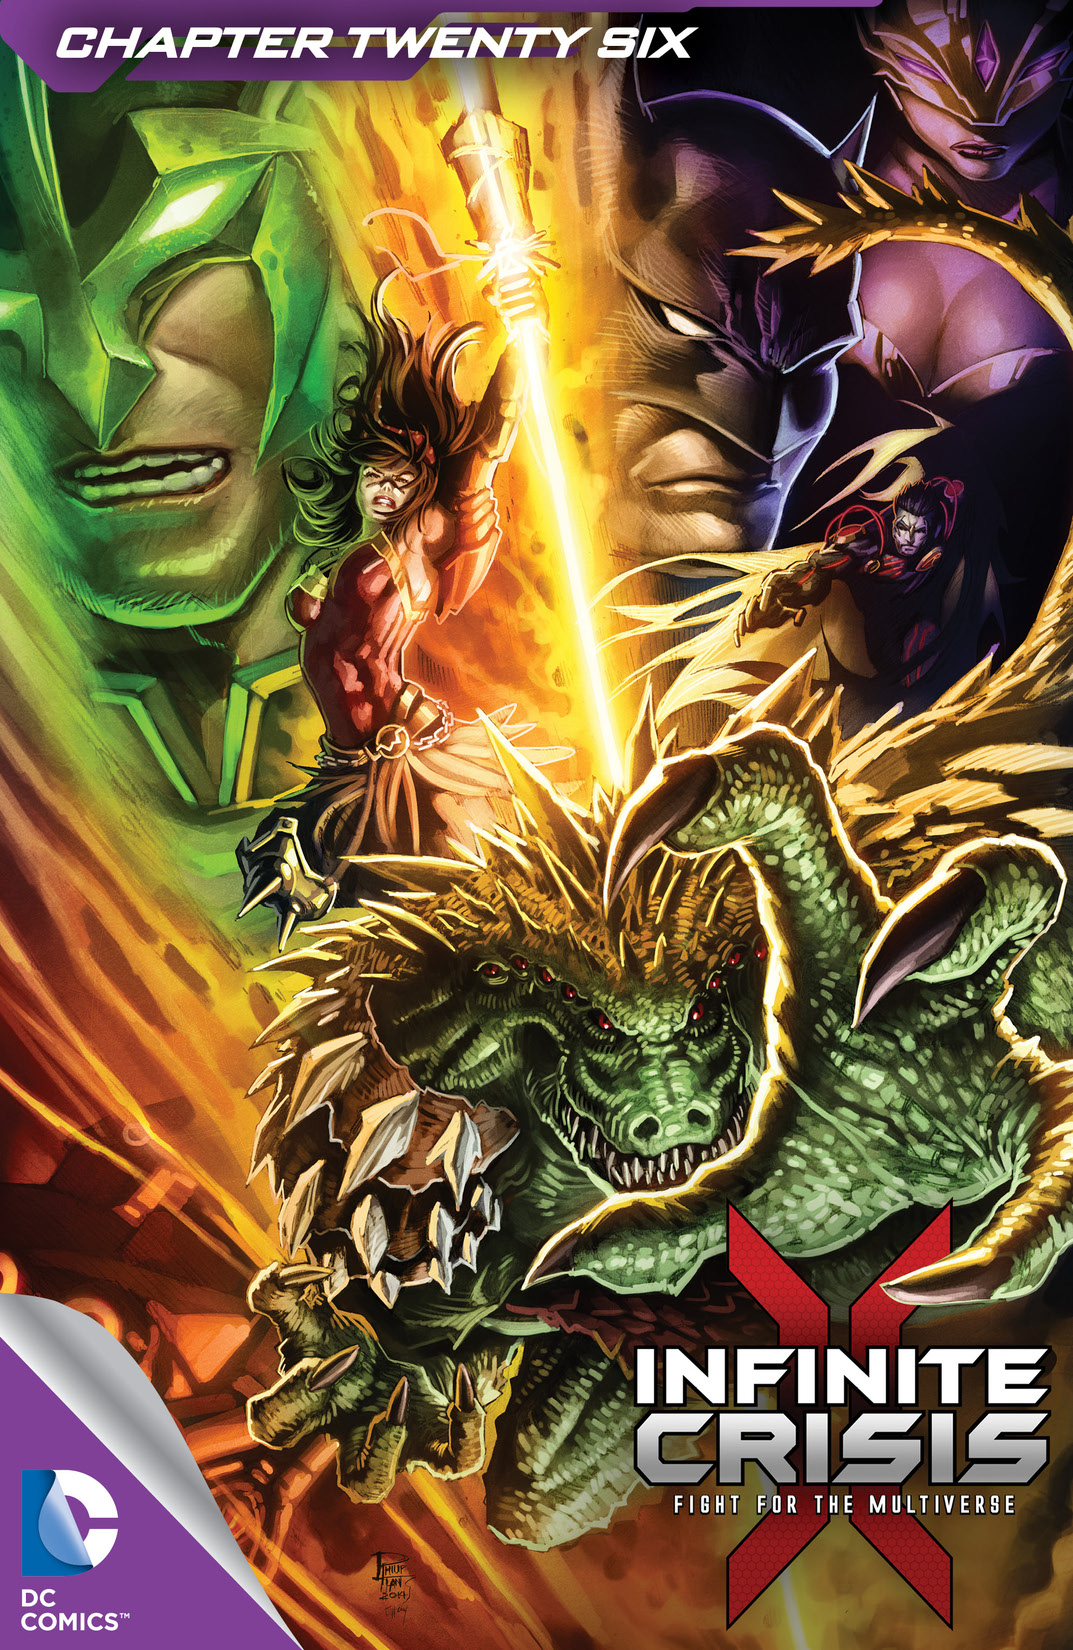 Infinite Crisis: Fight for the Multiverse #26 preview images